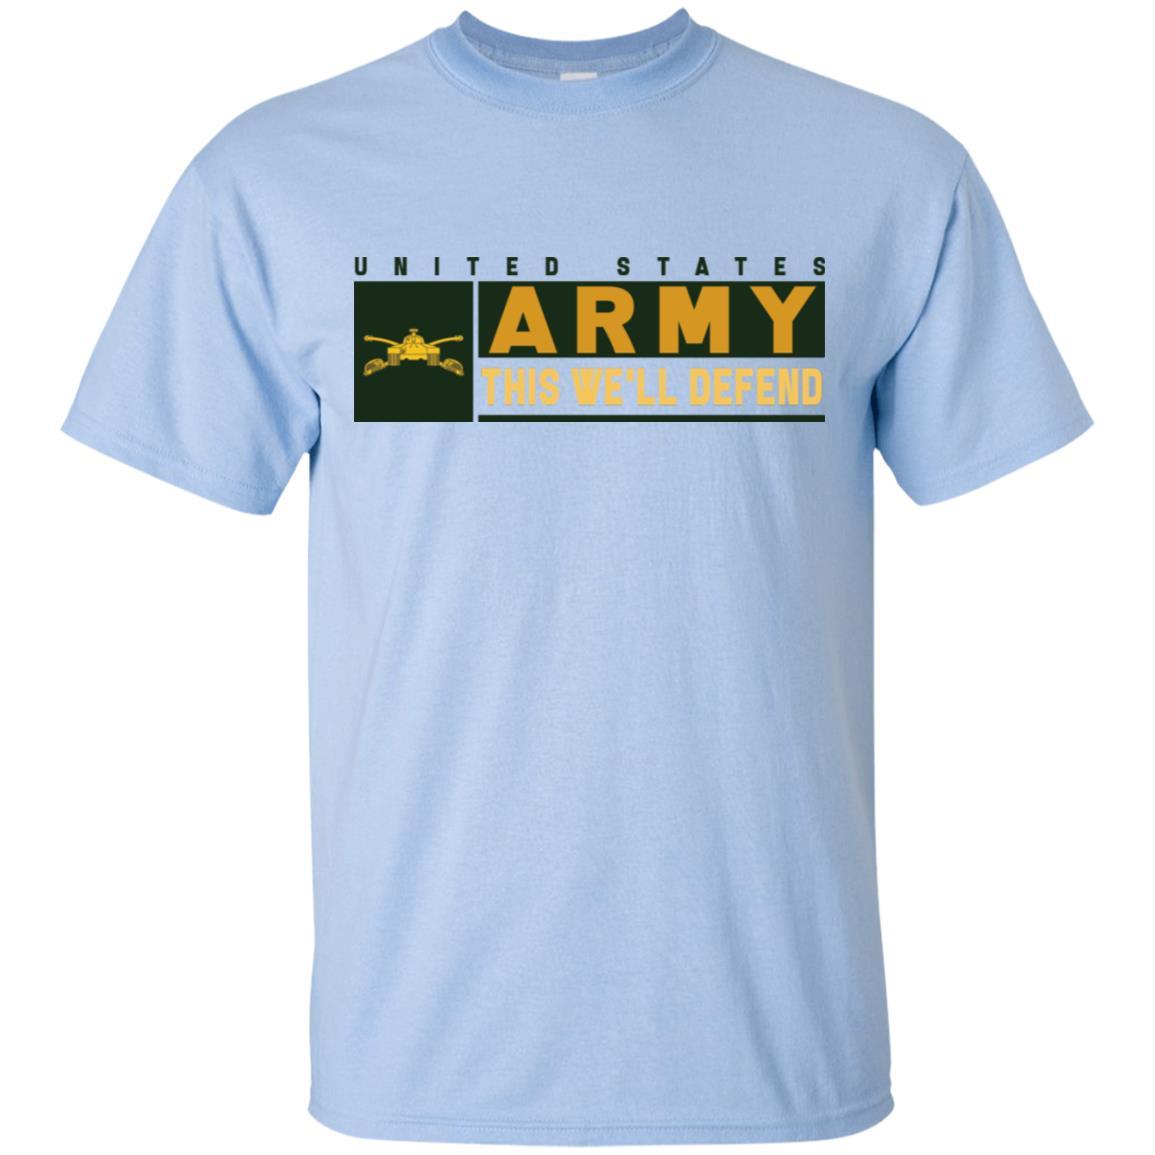 U.S Army Armor Branch- This We'll Defend T-Shirt On Front For Men-TShirt-Army-Veterans Nation